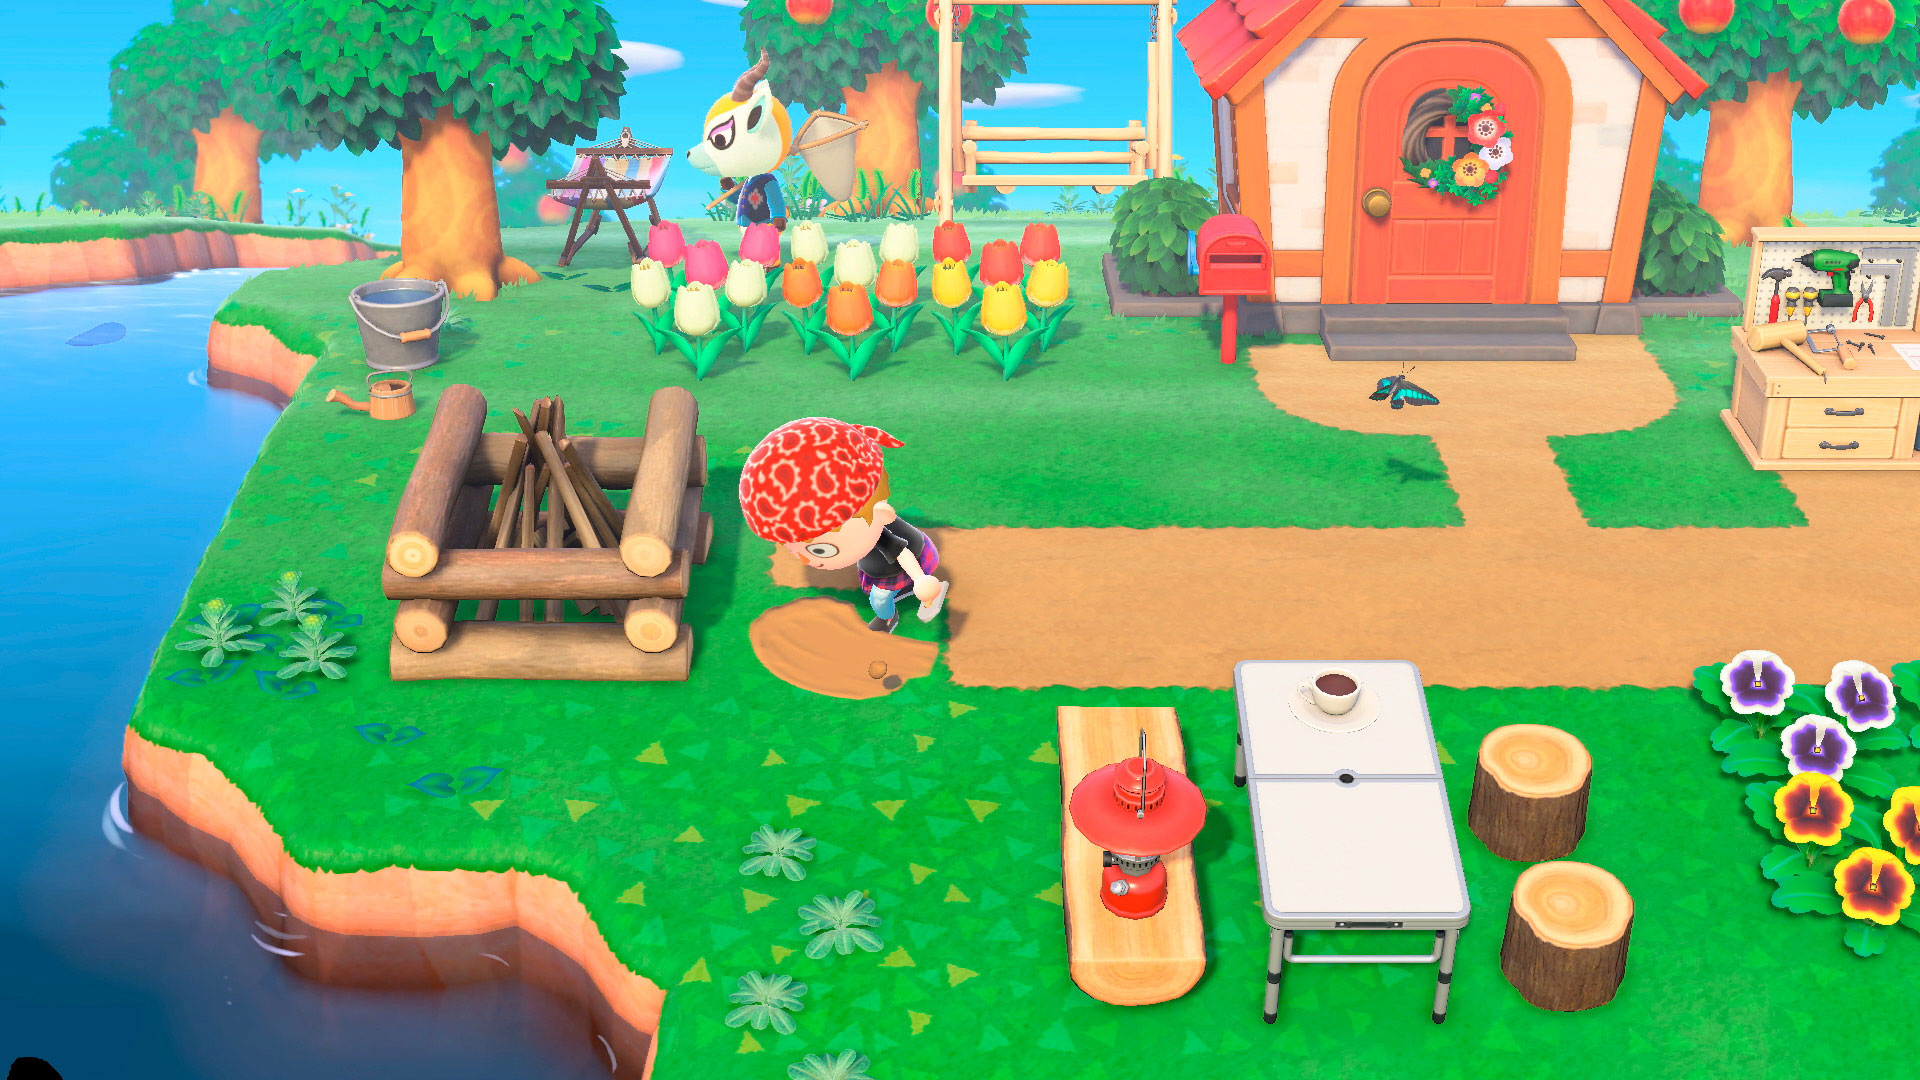 animal crossing new horizons download for pc